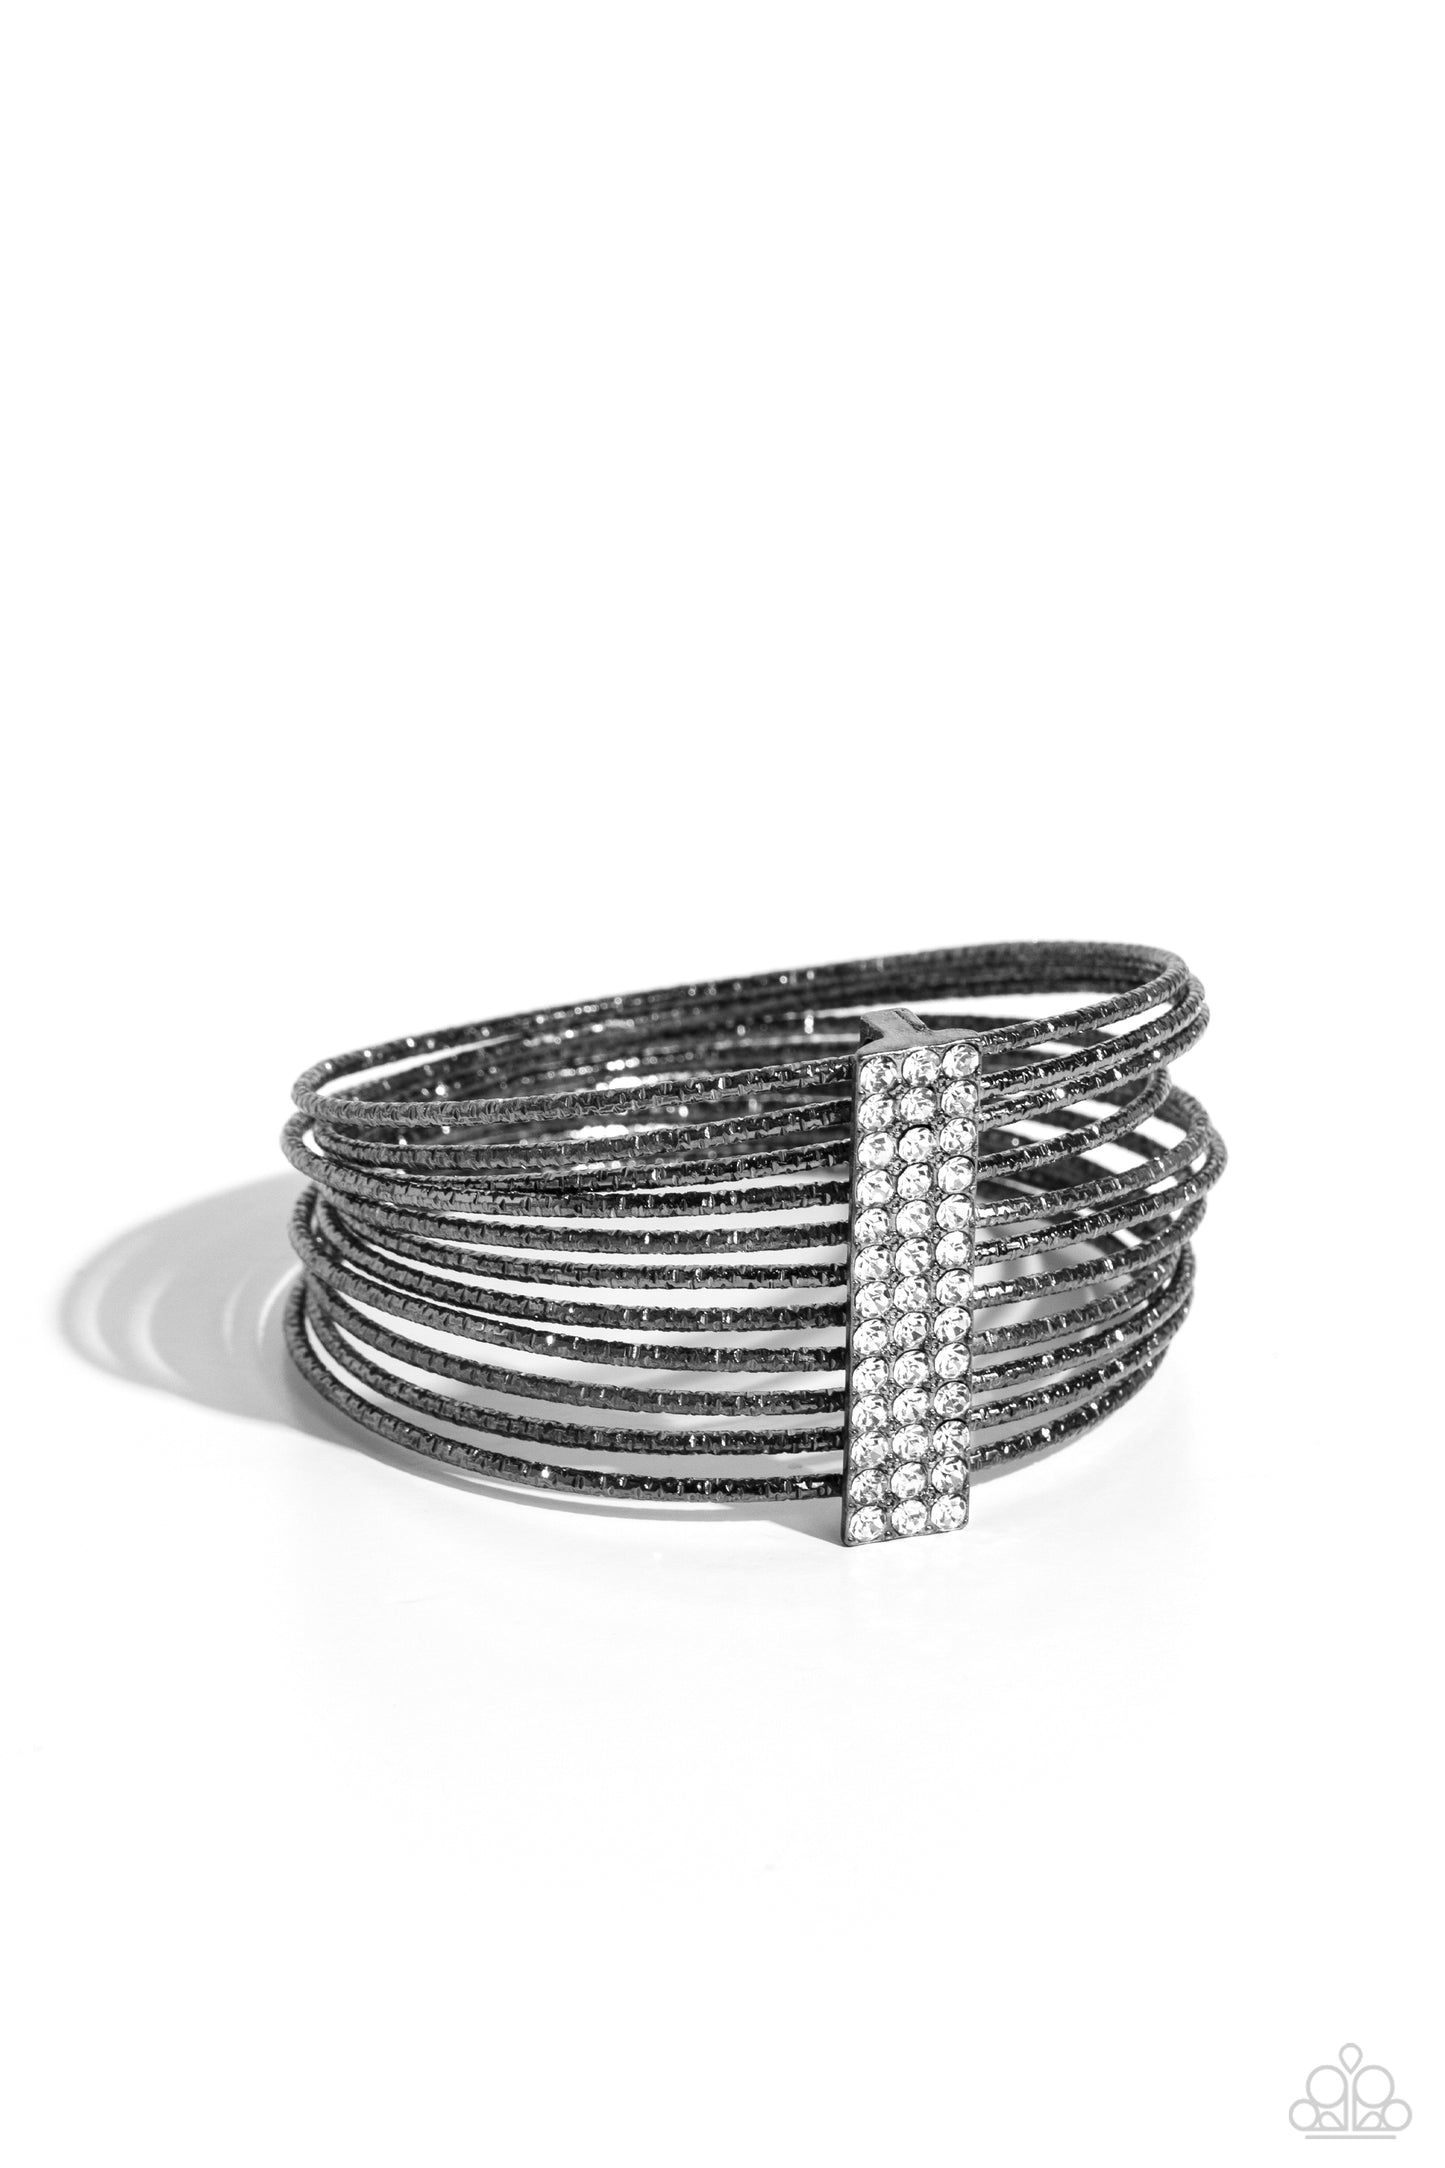 Shimmery Silhouette Black Bangle Bracelet - Paparazzi Accessories  Held together by an elongated rectangular gunmetal fitting and encrusted in three rows of white gems, gunmetal bangles embossed in shimmery diamond-cut textures stack across the wrist for a refined display.  Sold as one individual bracelet.  Sku:  P9RE-BKXX-382XX